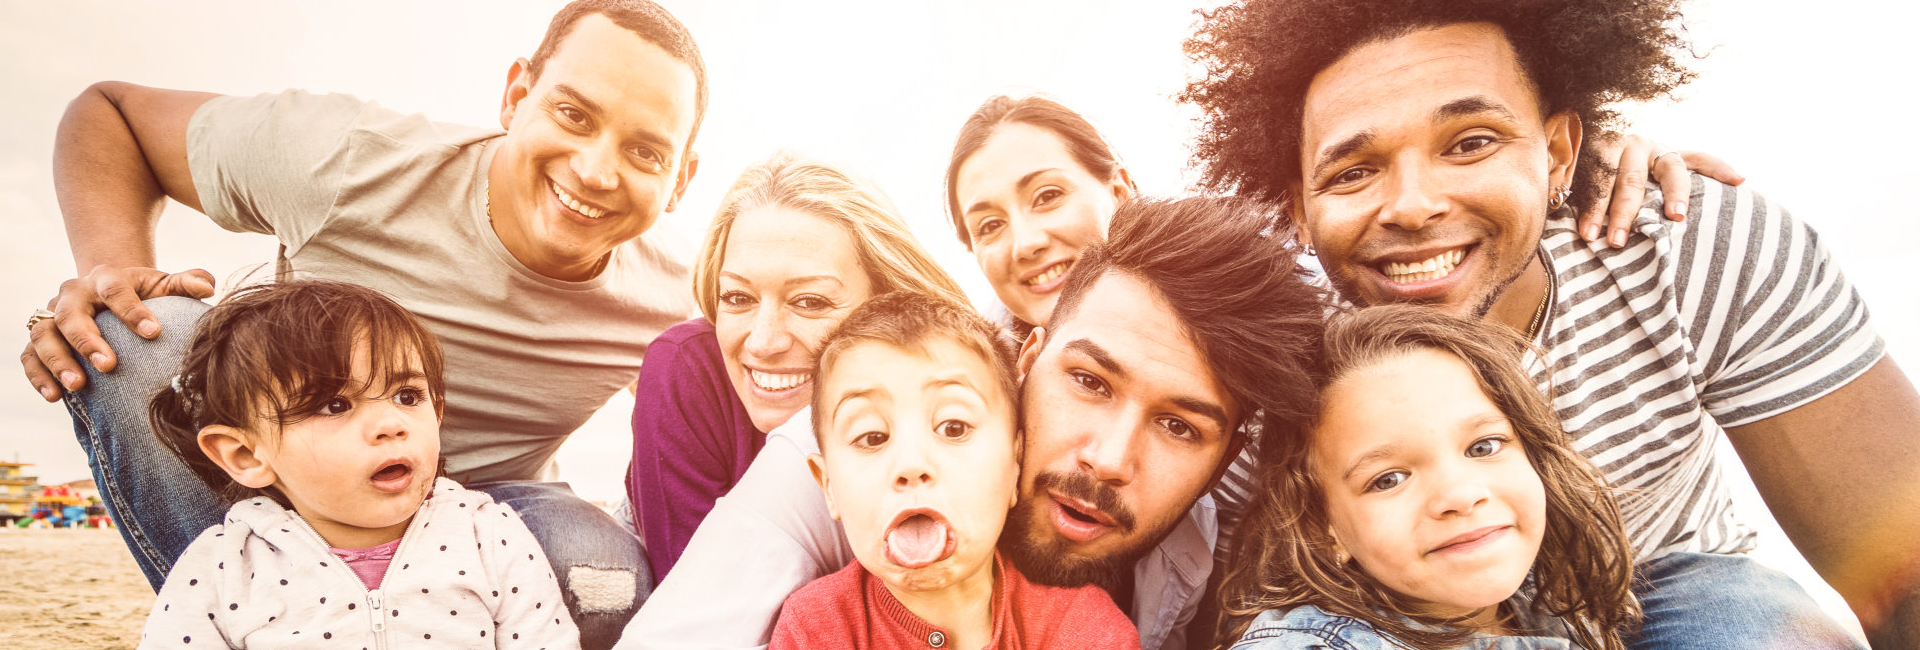 Happy multiracial families taking selfie at beach making funny faces